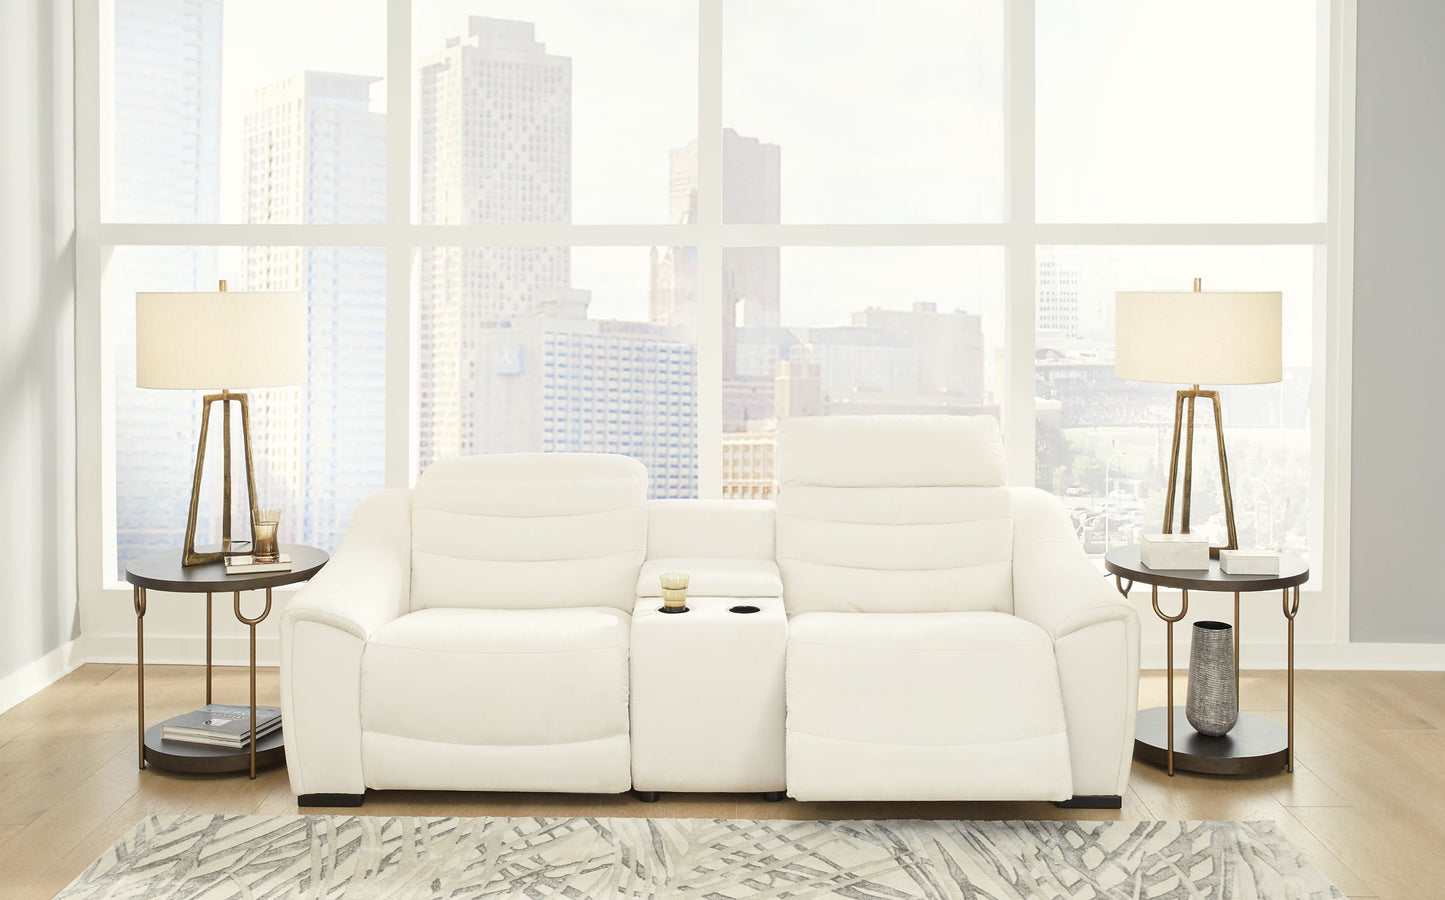 Next-Gen Gaucho 3-Piece Sectional with Recliner at Cloud 9 Mattress & Furniture furniture, home furnishing, home decor